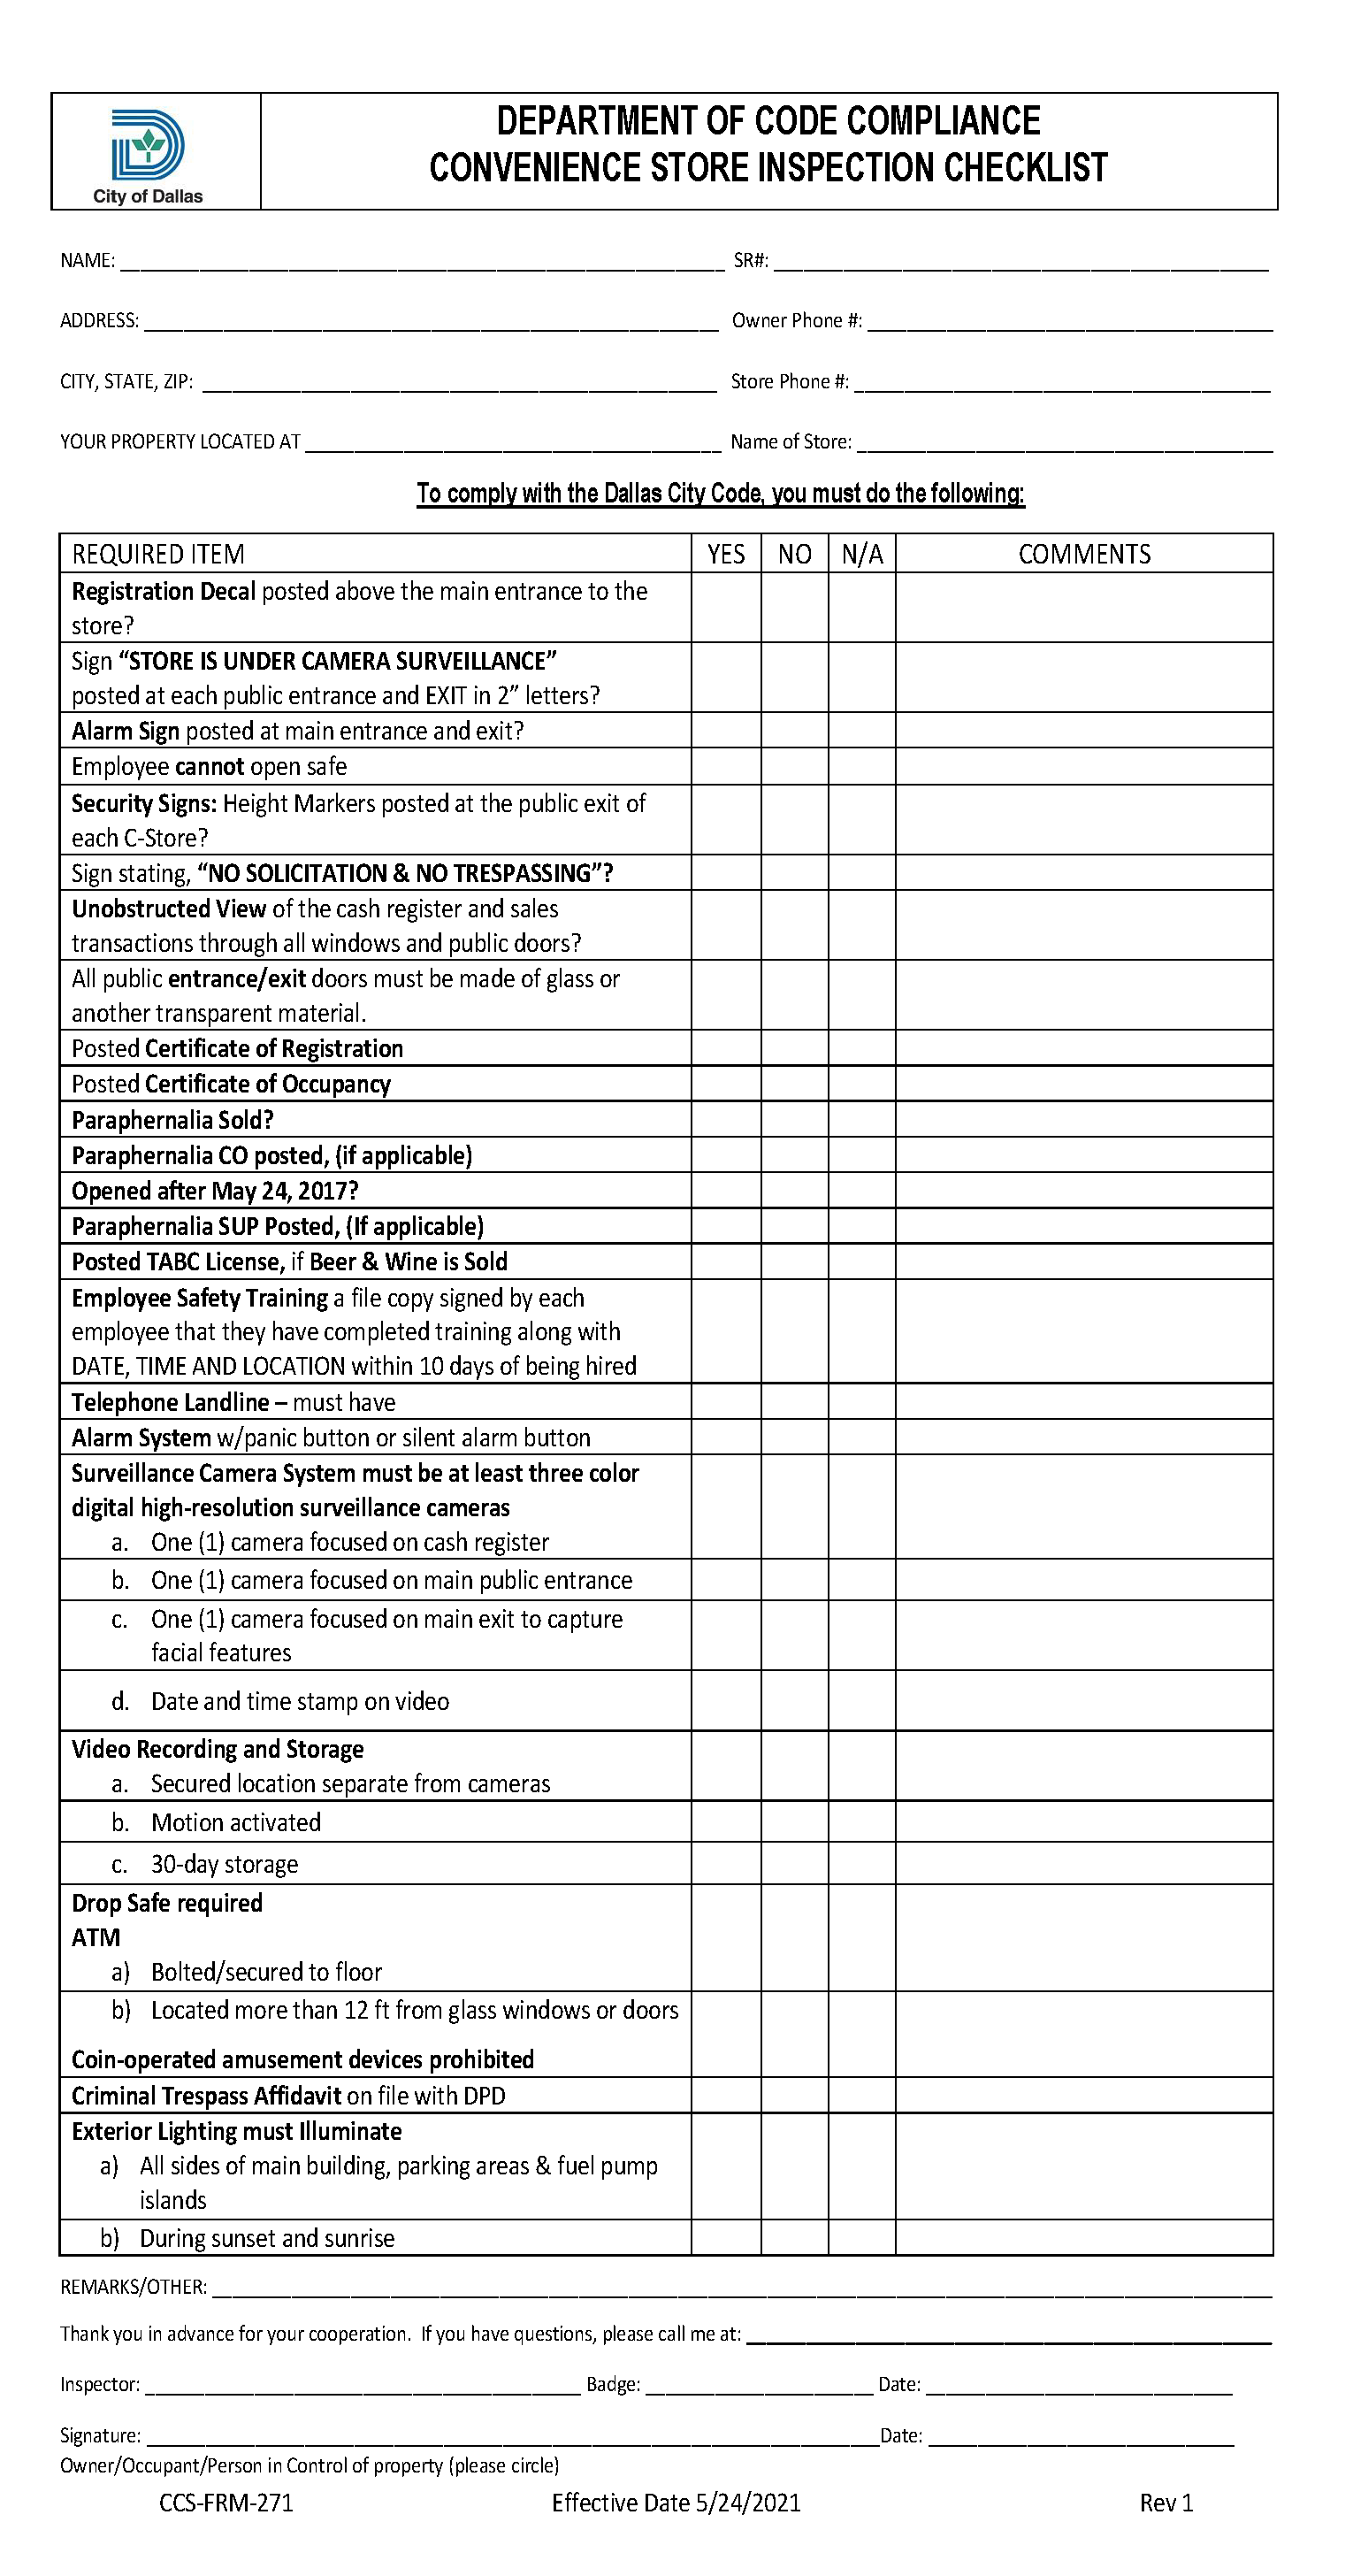 CCS-FRM-271 Department of Code Compliance Convenience Store Inspection Checklist.png